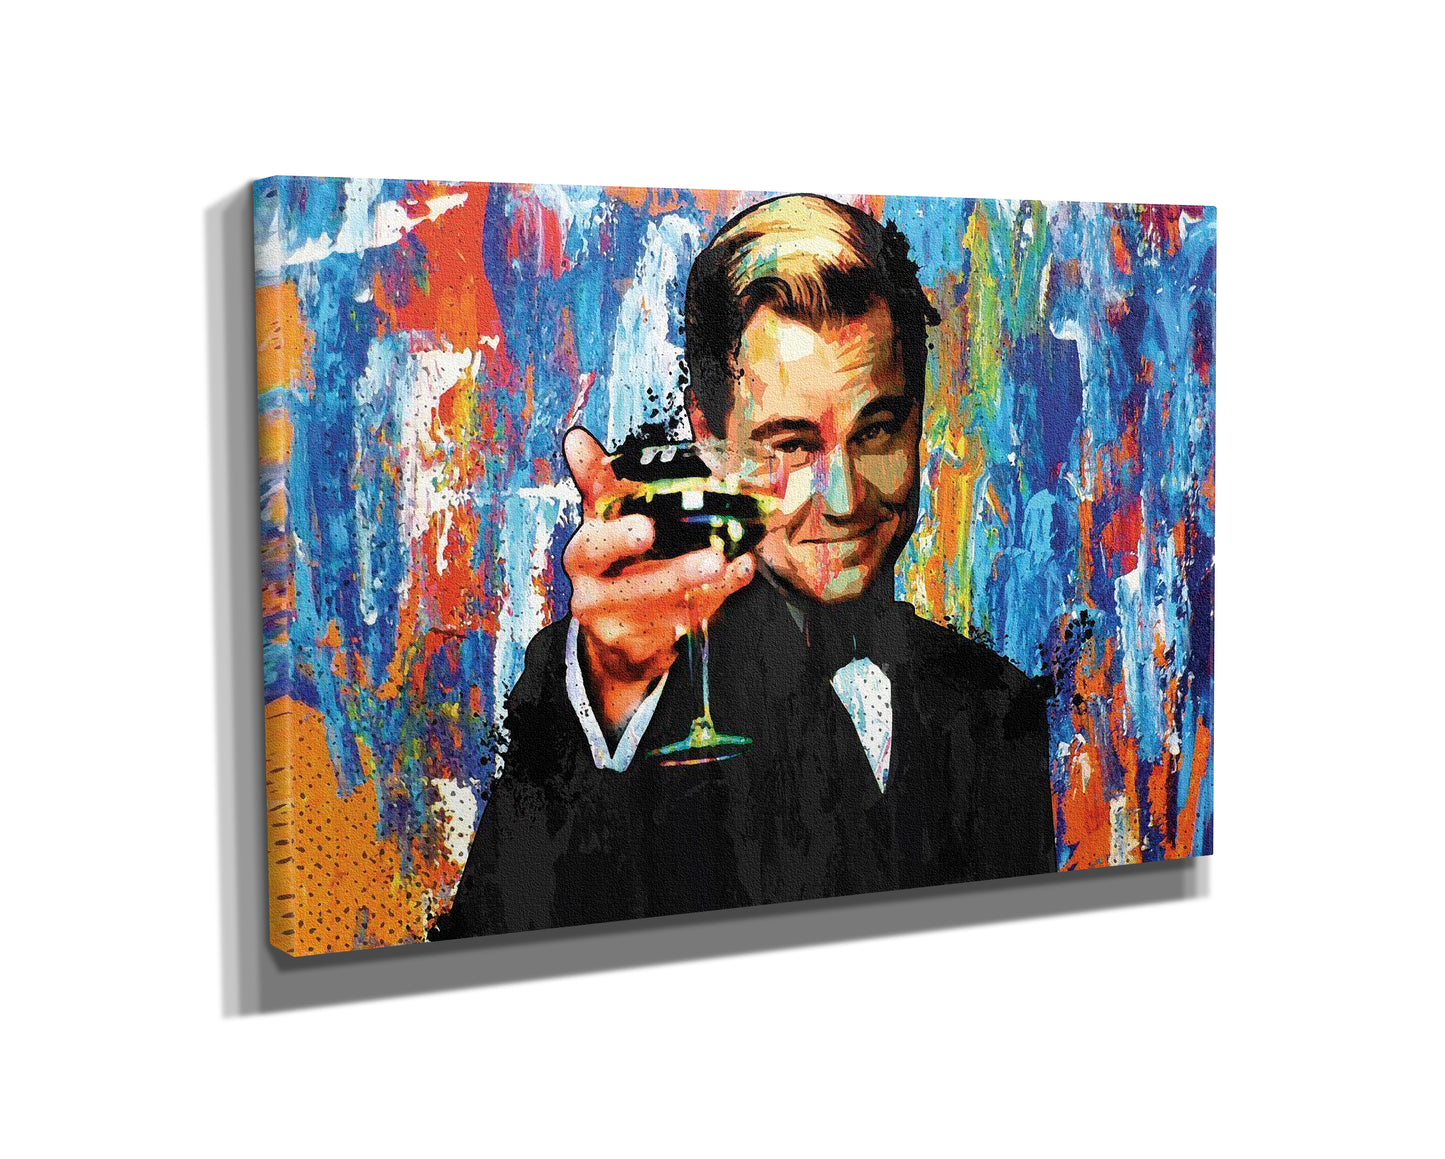 The Great Gatsby Poster Leonardo Di Caprio Movie Painting Hand Made Posters Canvas Print Wall Art Home Decor